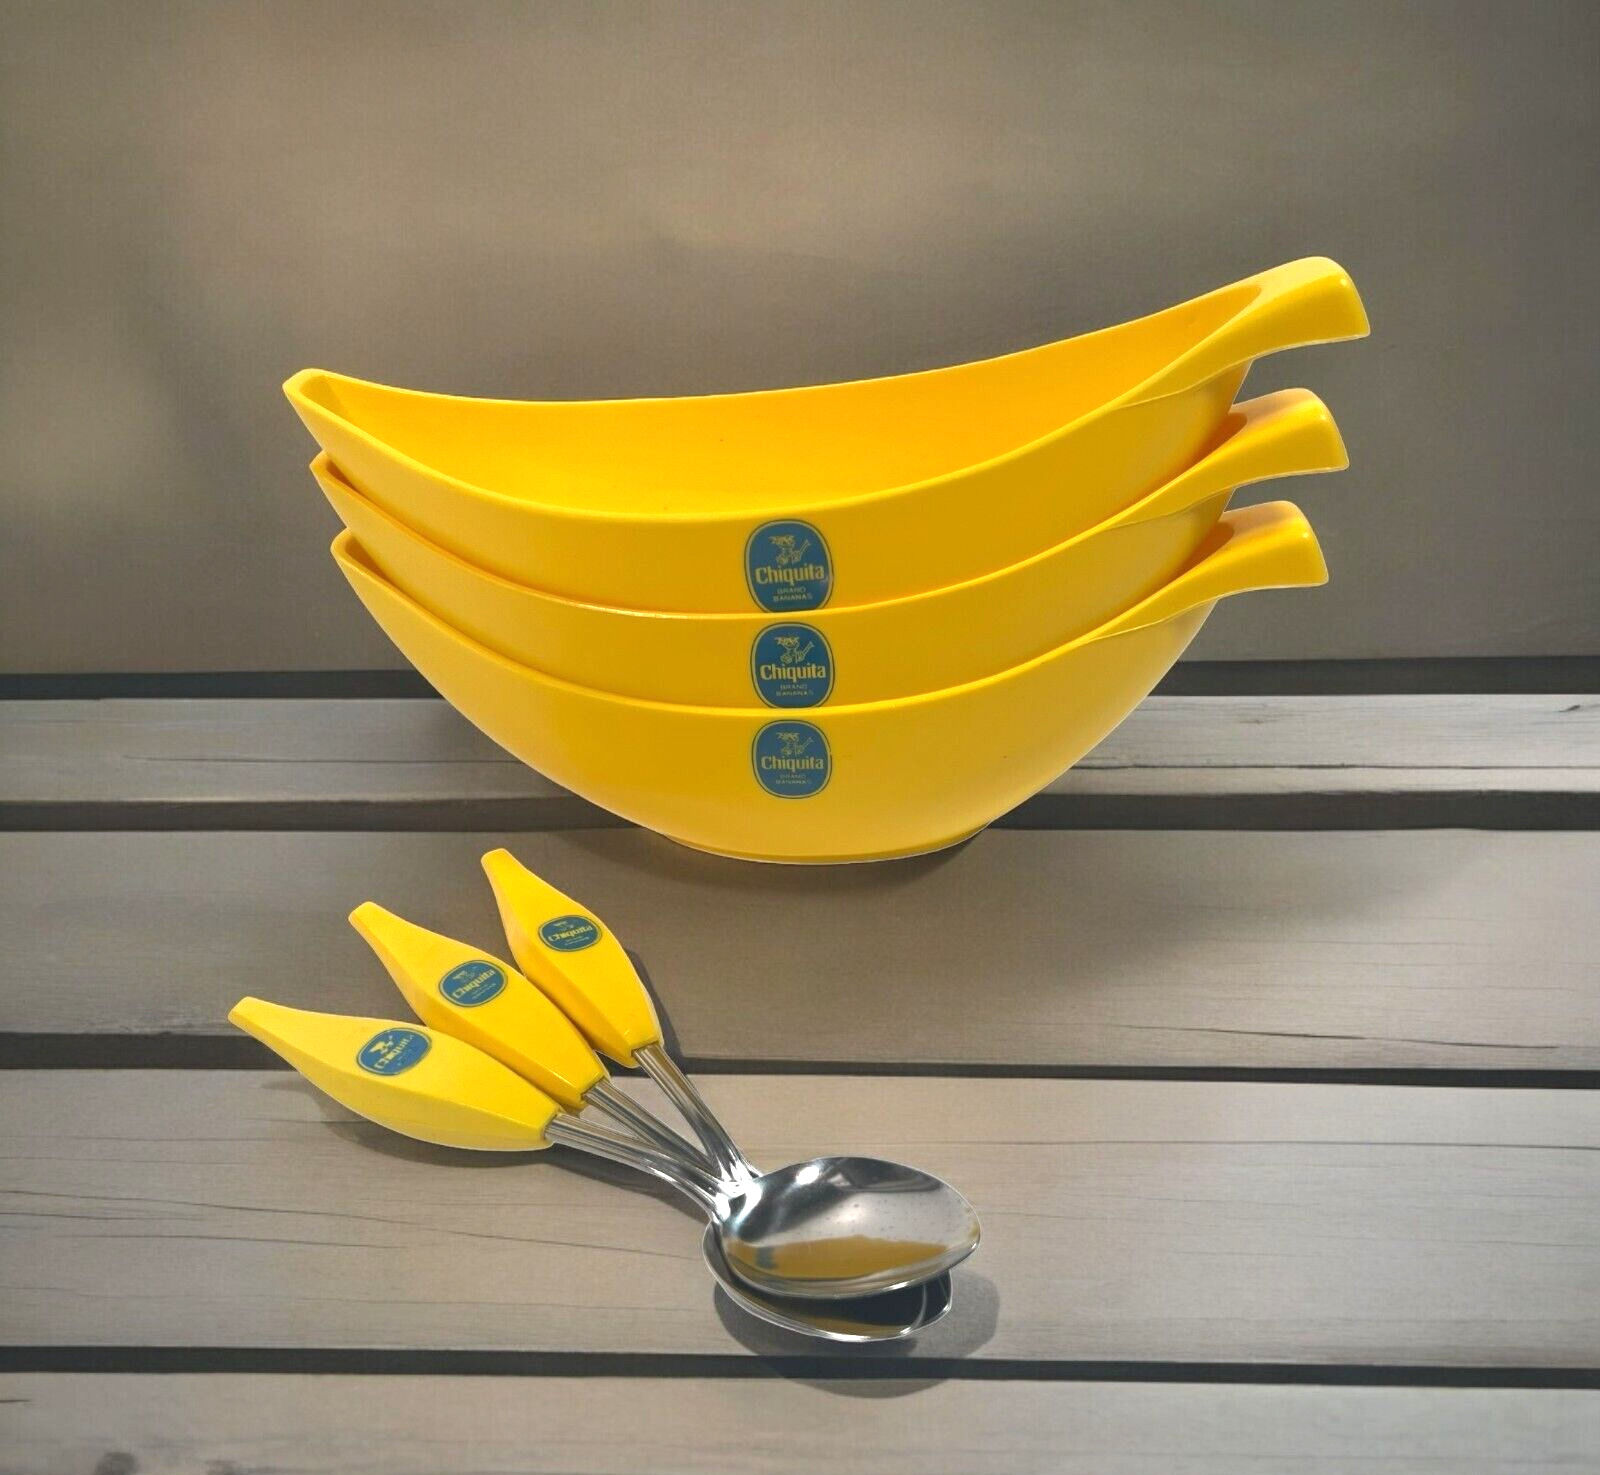 Chiquita Banana Split Boats Cereal Ice Cream Dishes with Spoons Set of 3 Vintage